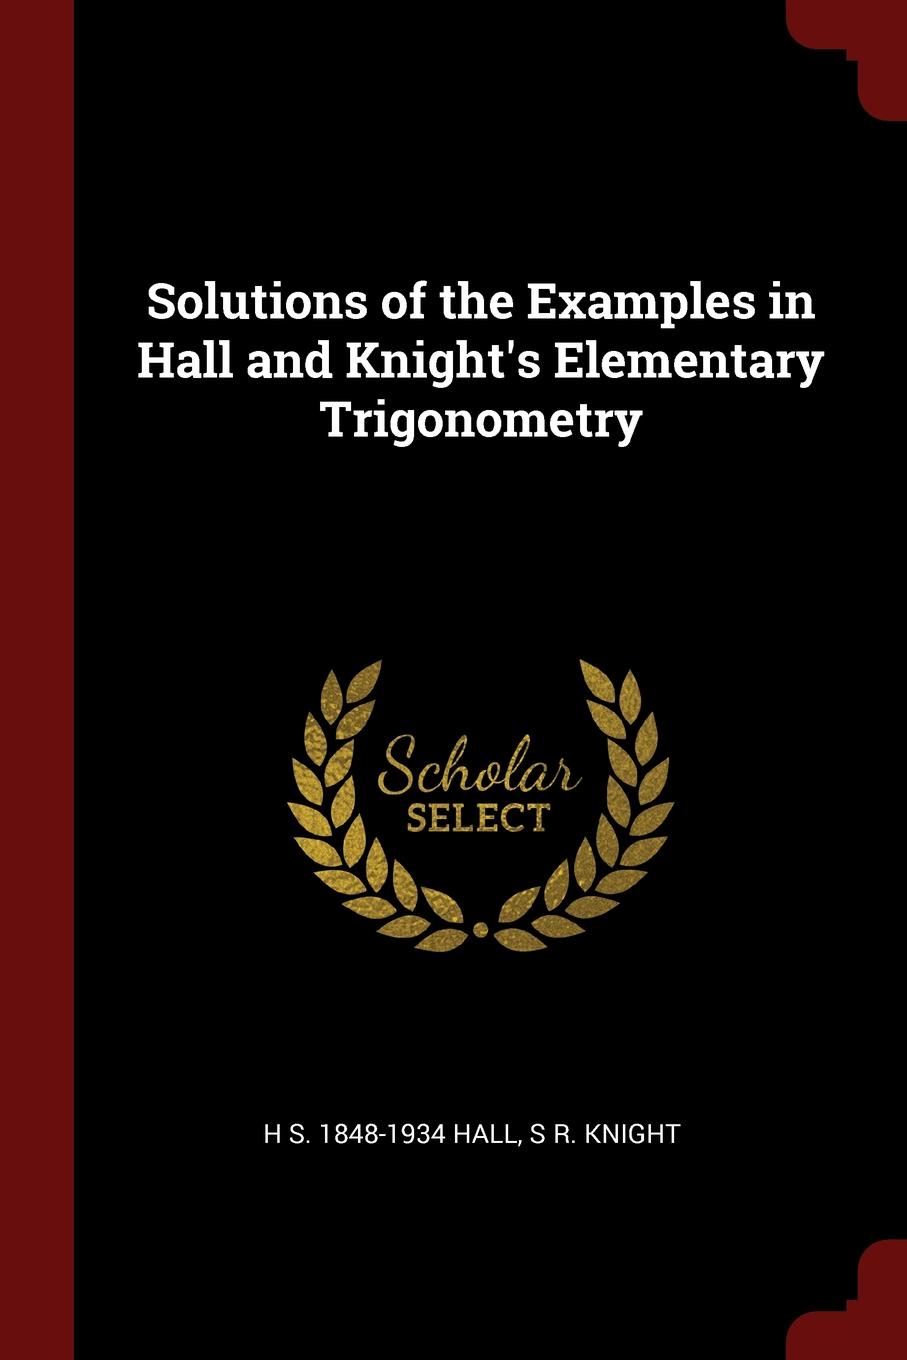 Solutions of the Examples in Hall and Knight.s Elementary Trigonometry